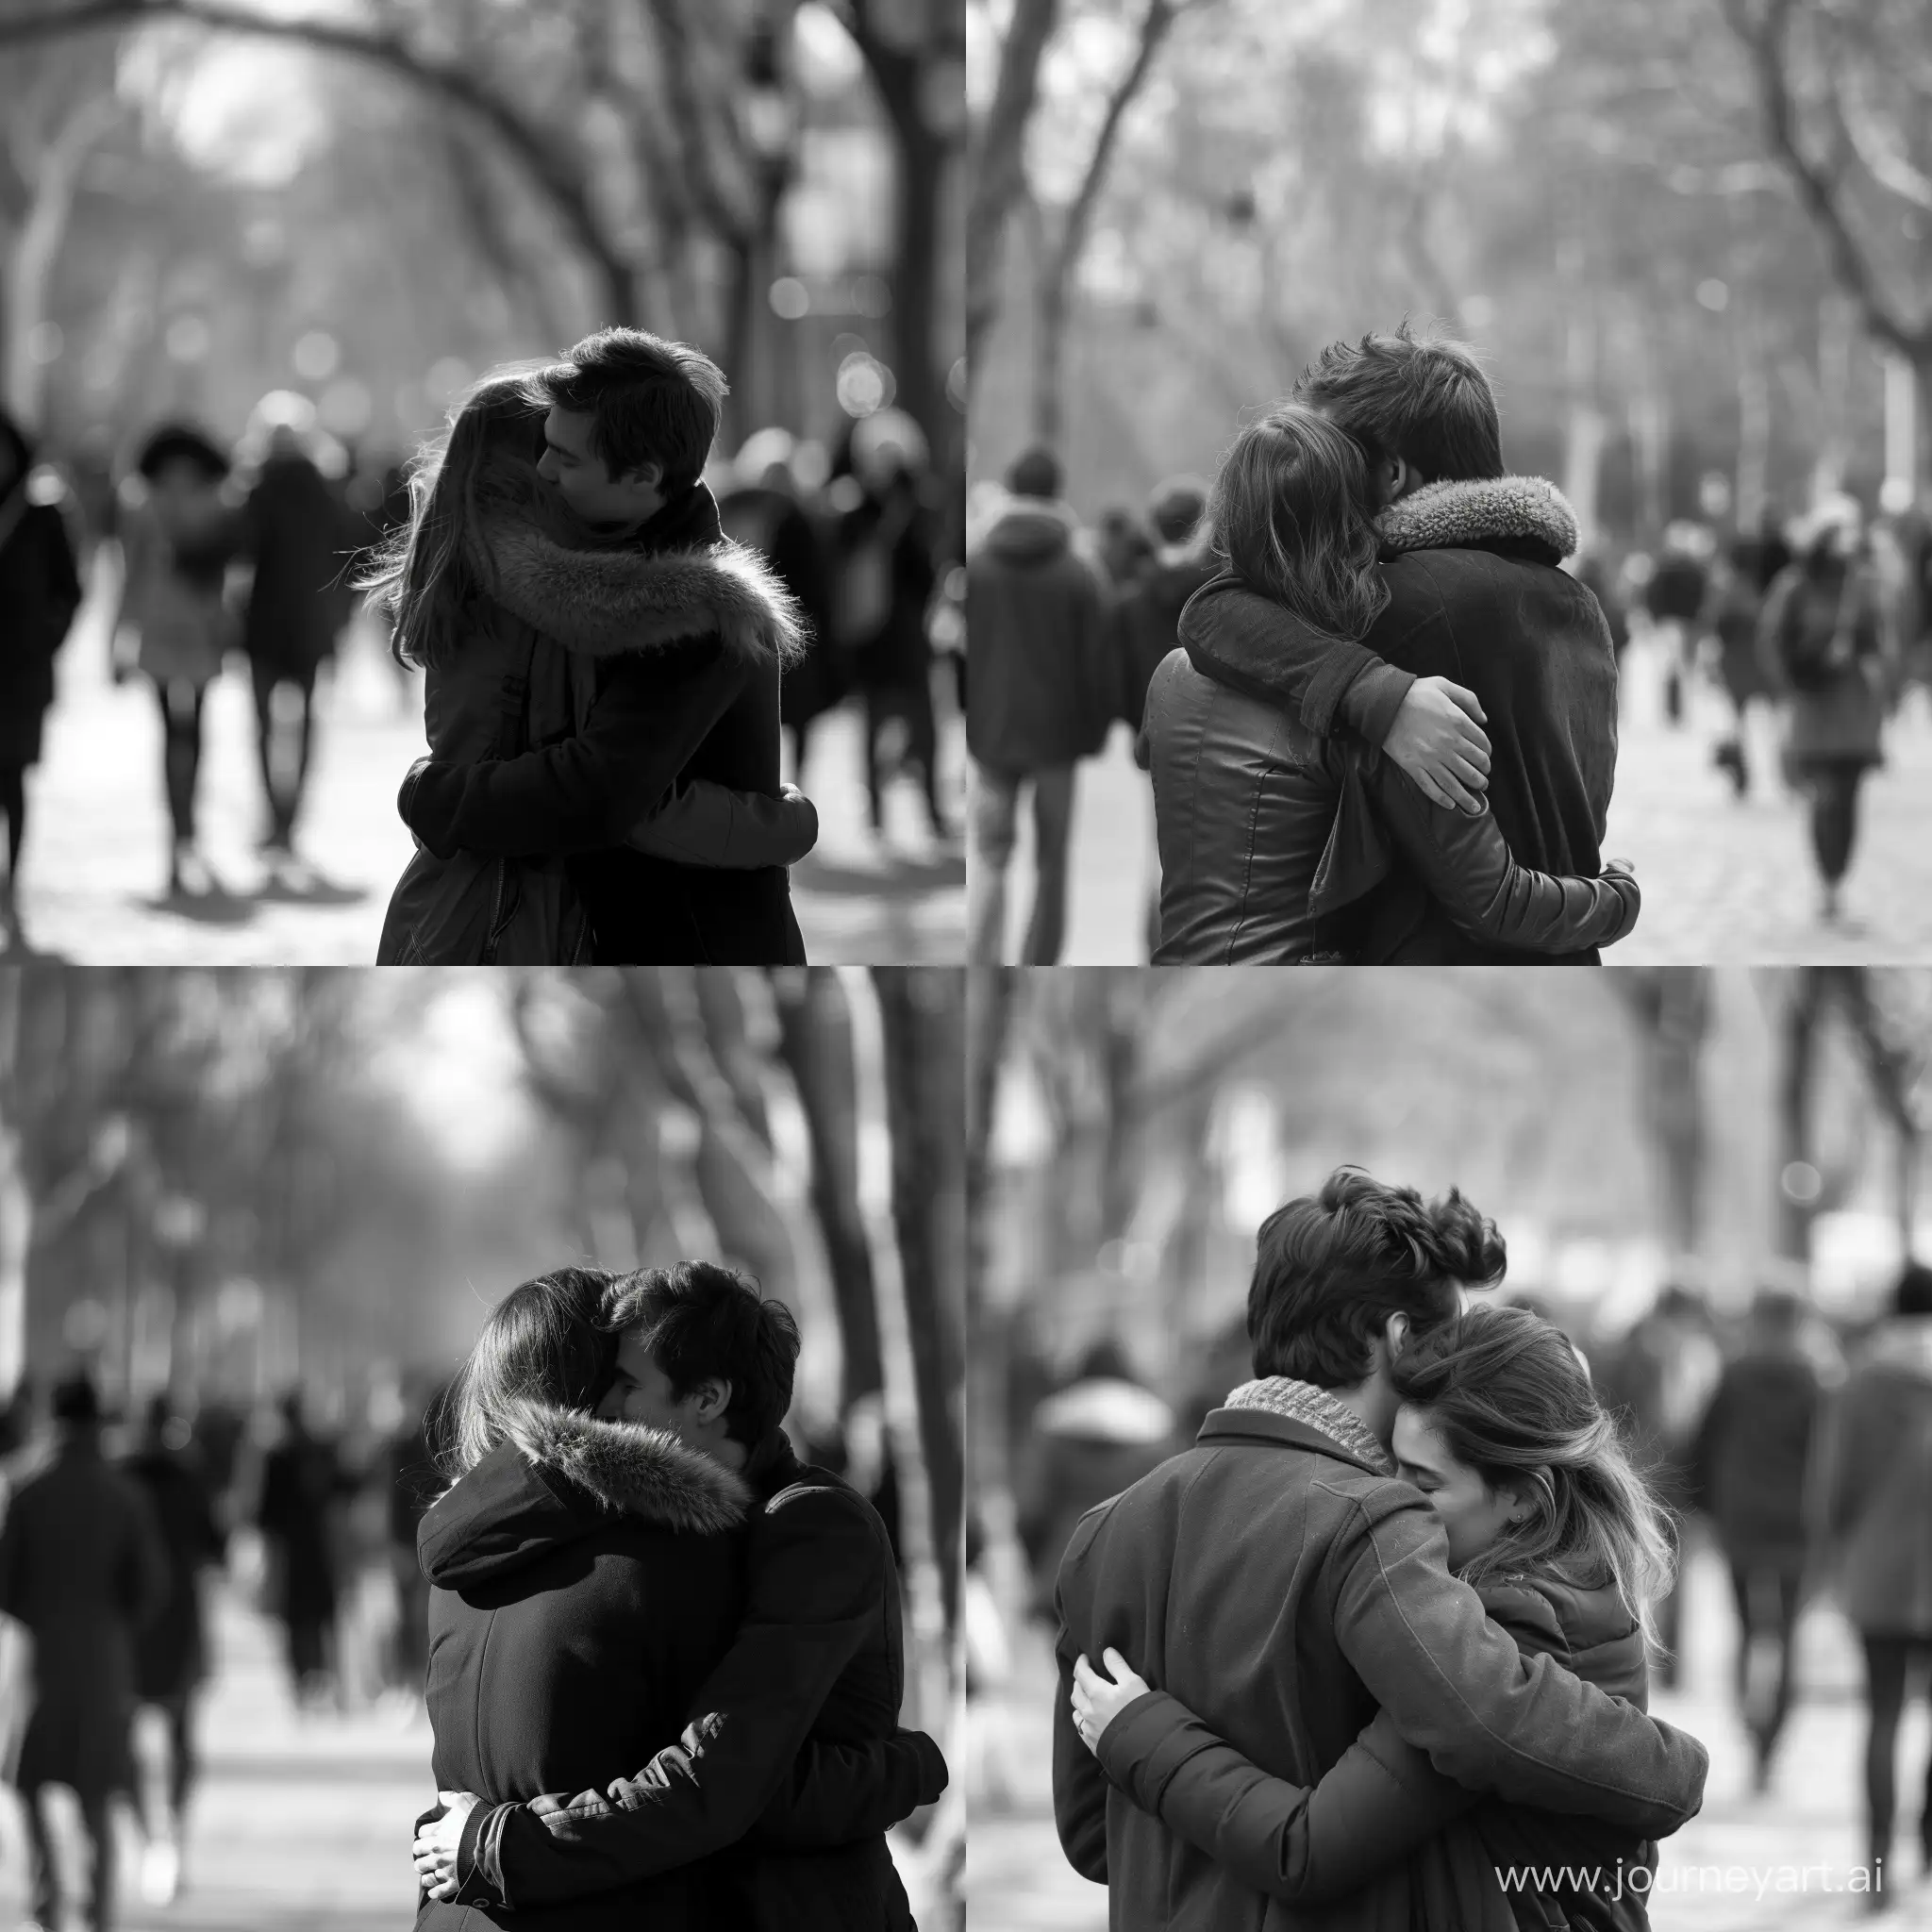 Romantic-Embrace-in-Park-with-Blurred-Figures-Black-and-White